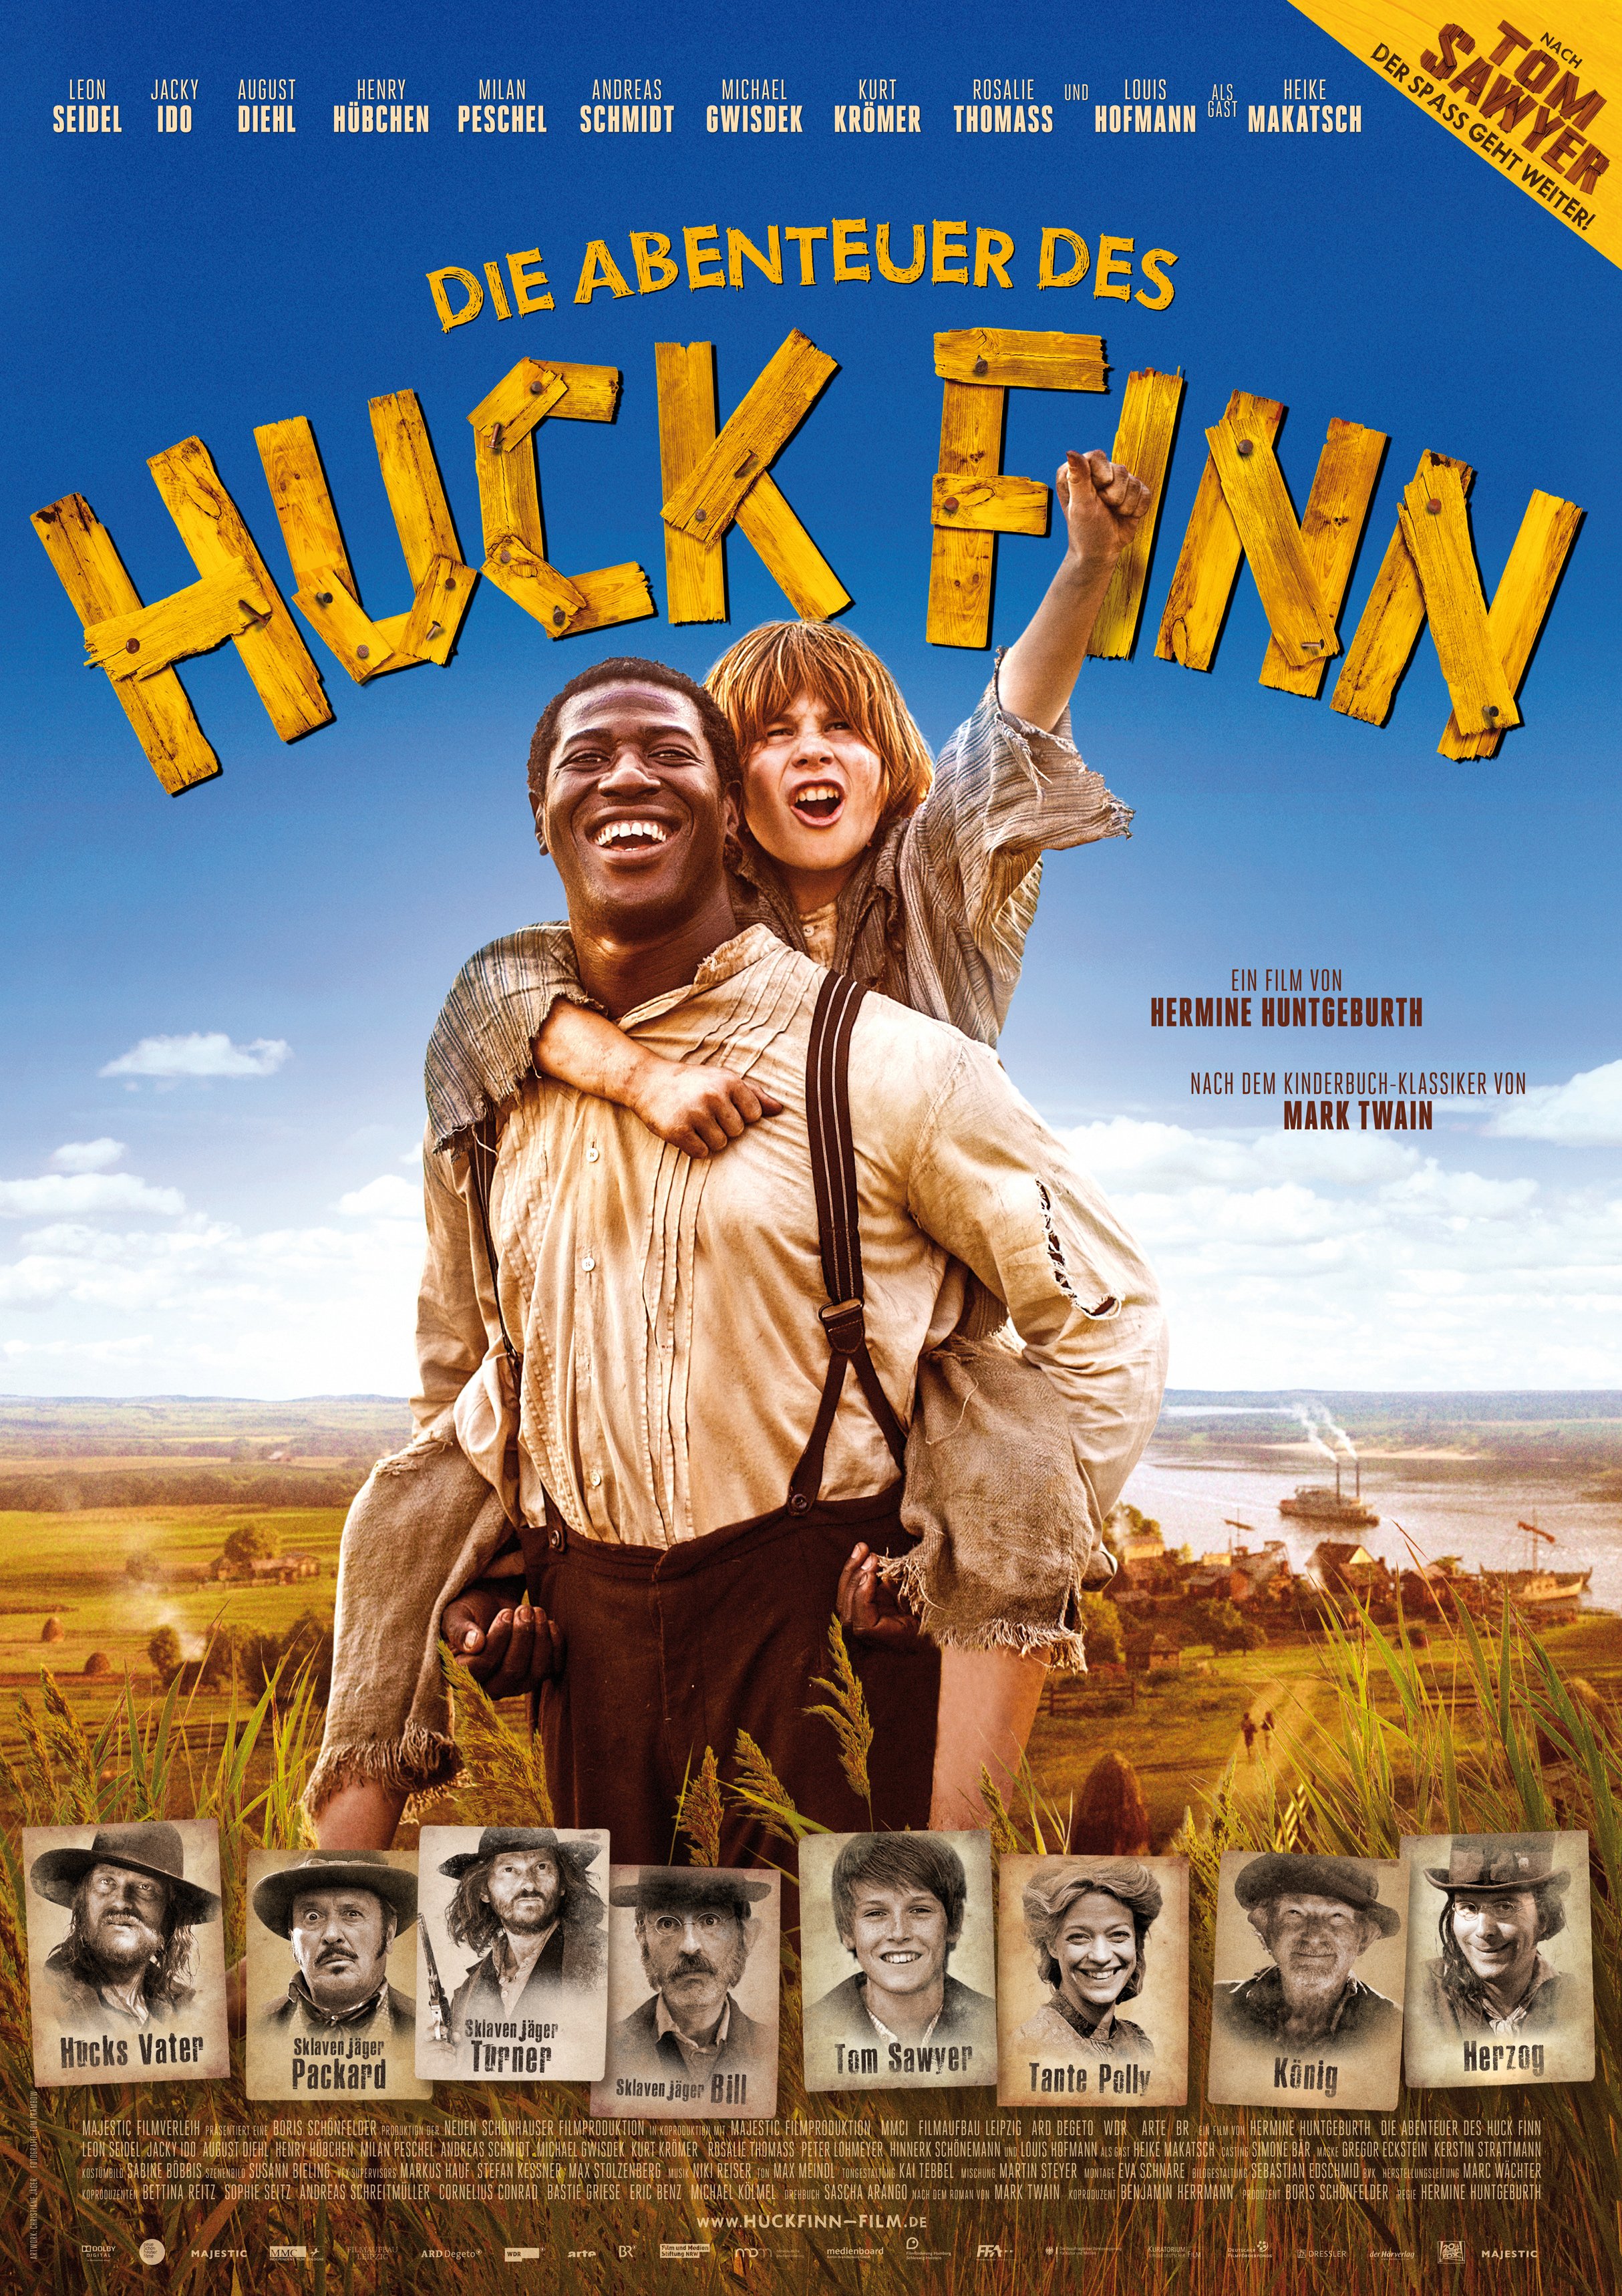 German poster of the movie The Adventures of Huck Finn